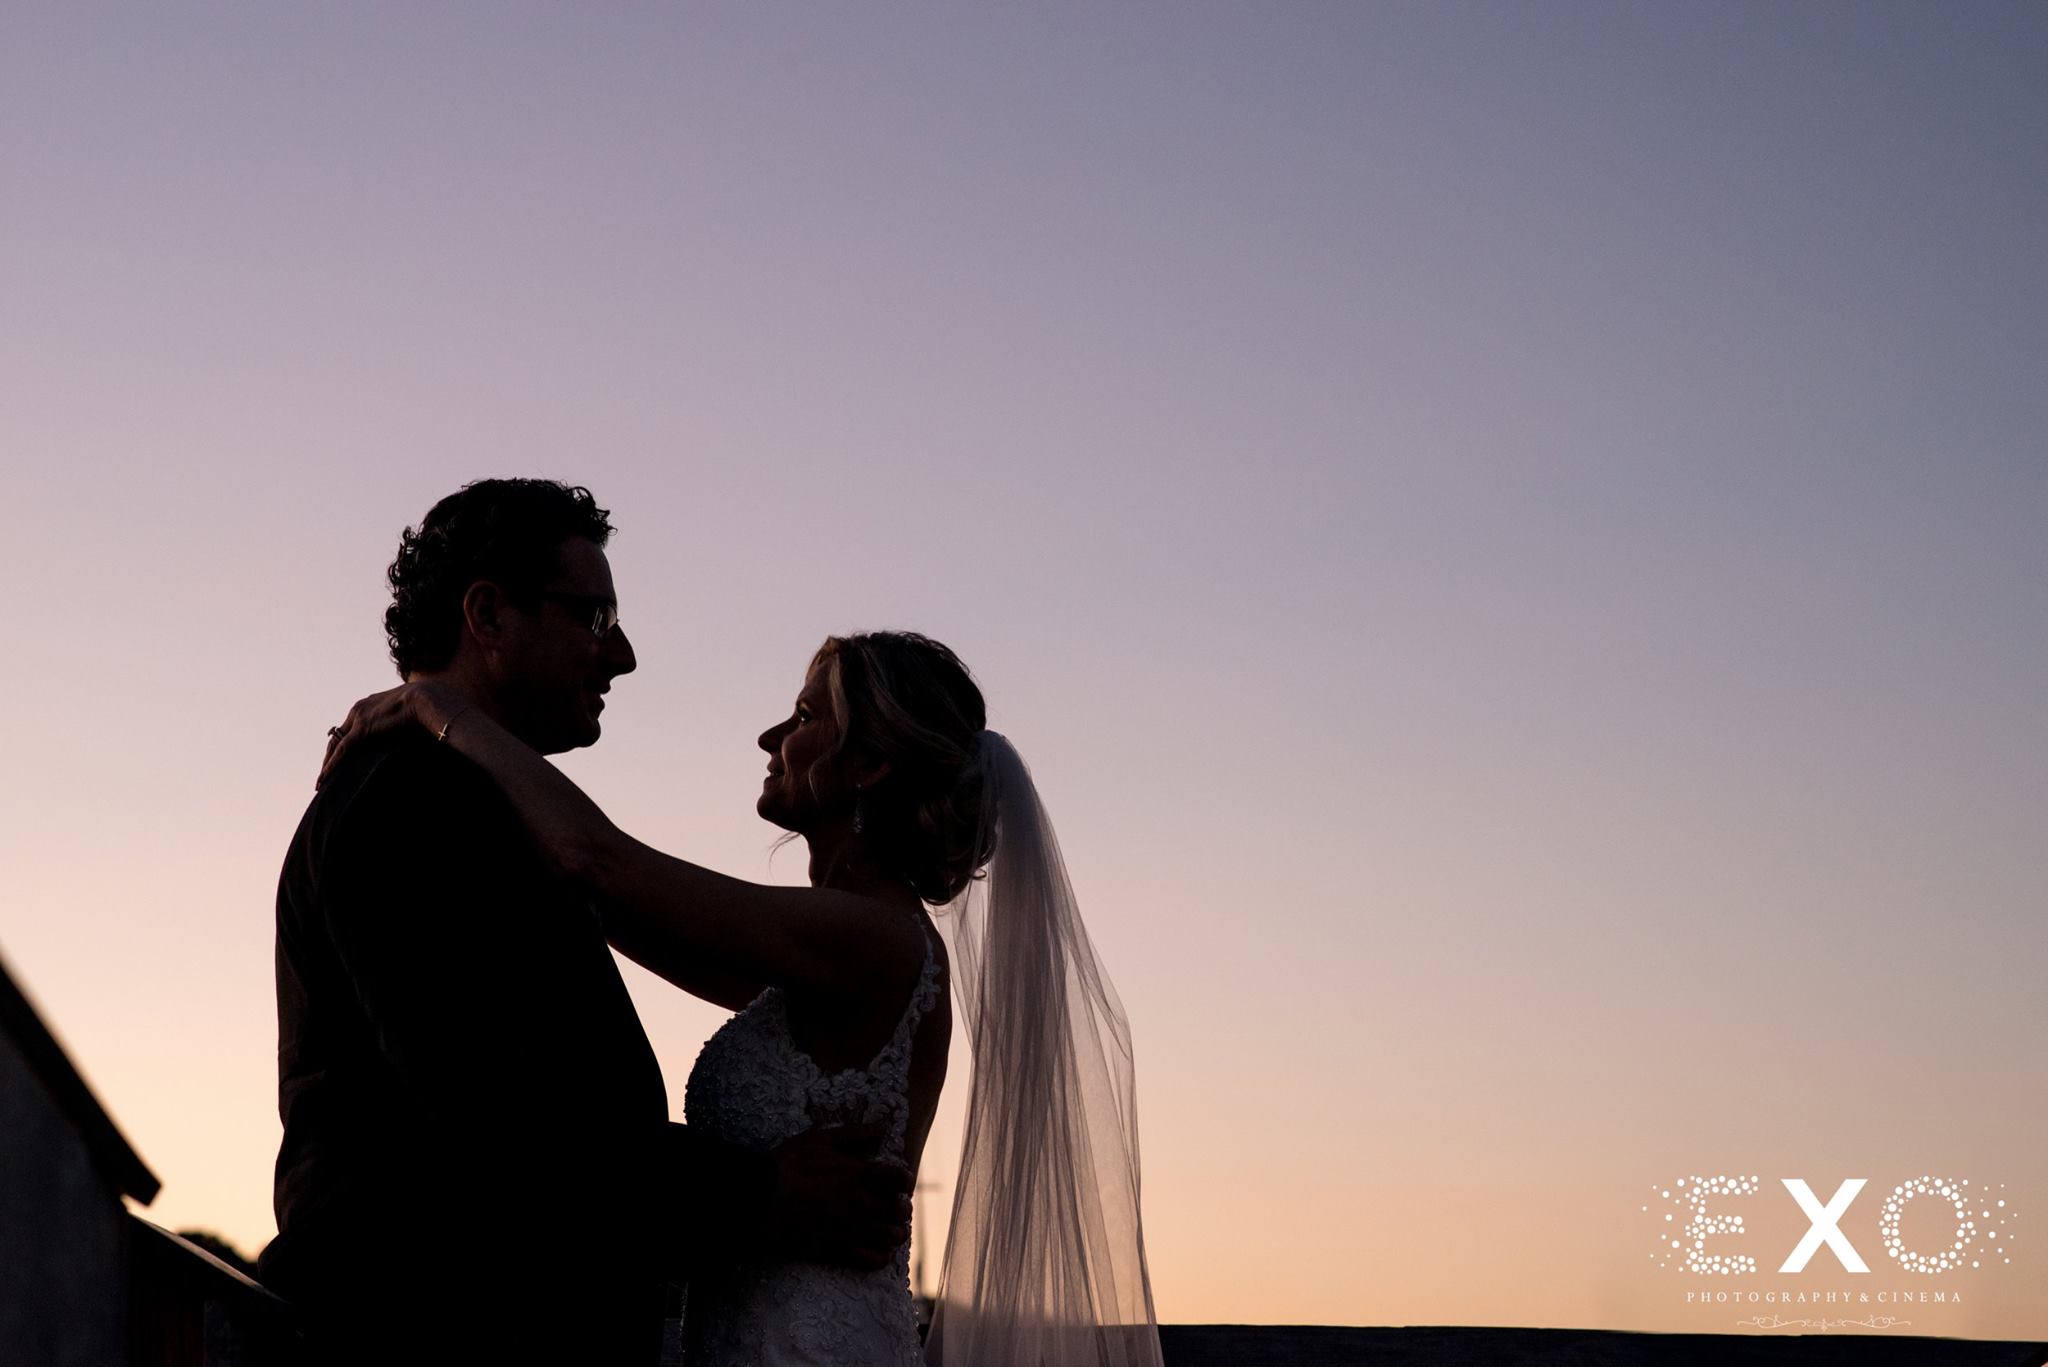 silhouette shot of bride and groom at sunset